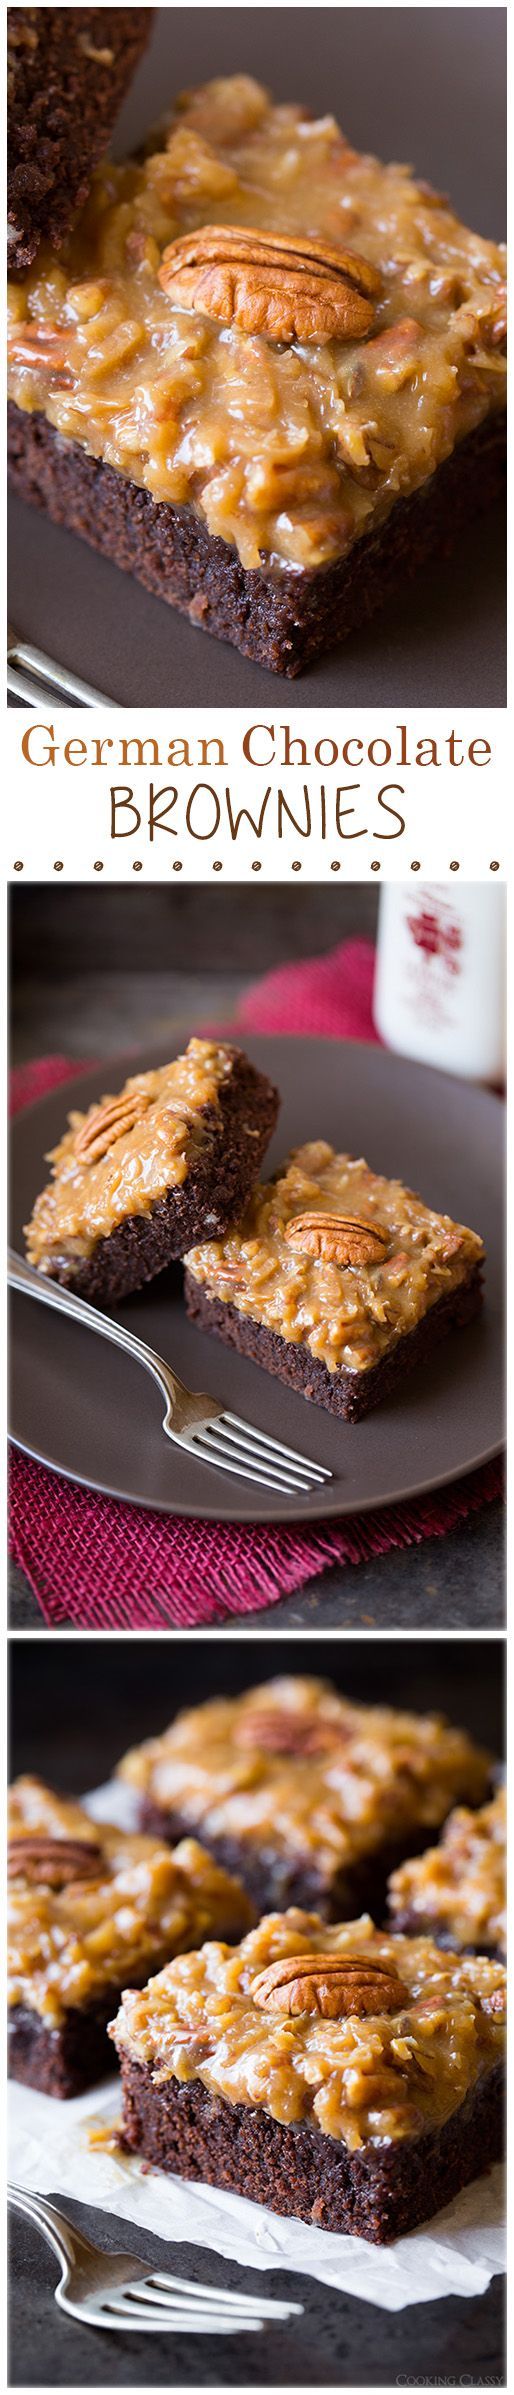 German Chocolate Brownies – they’re even better than the cake, they’re just totally irresistible!